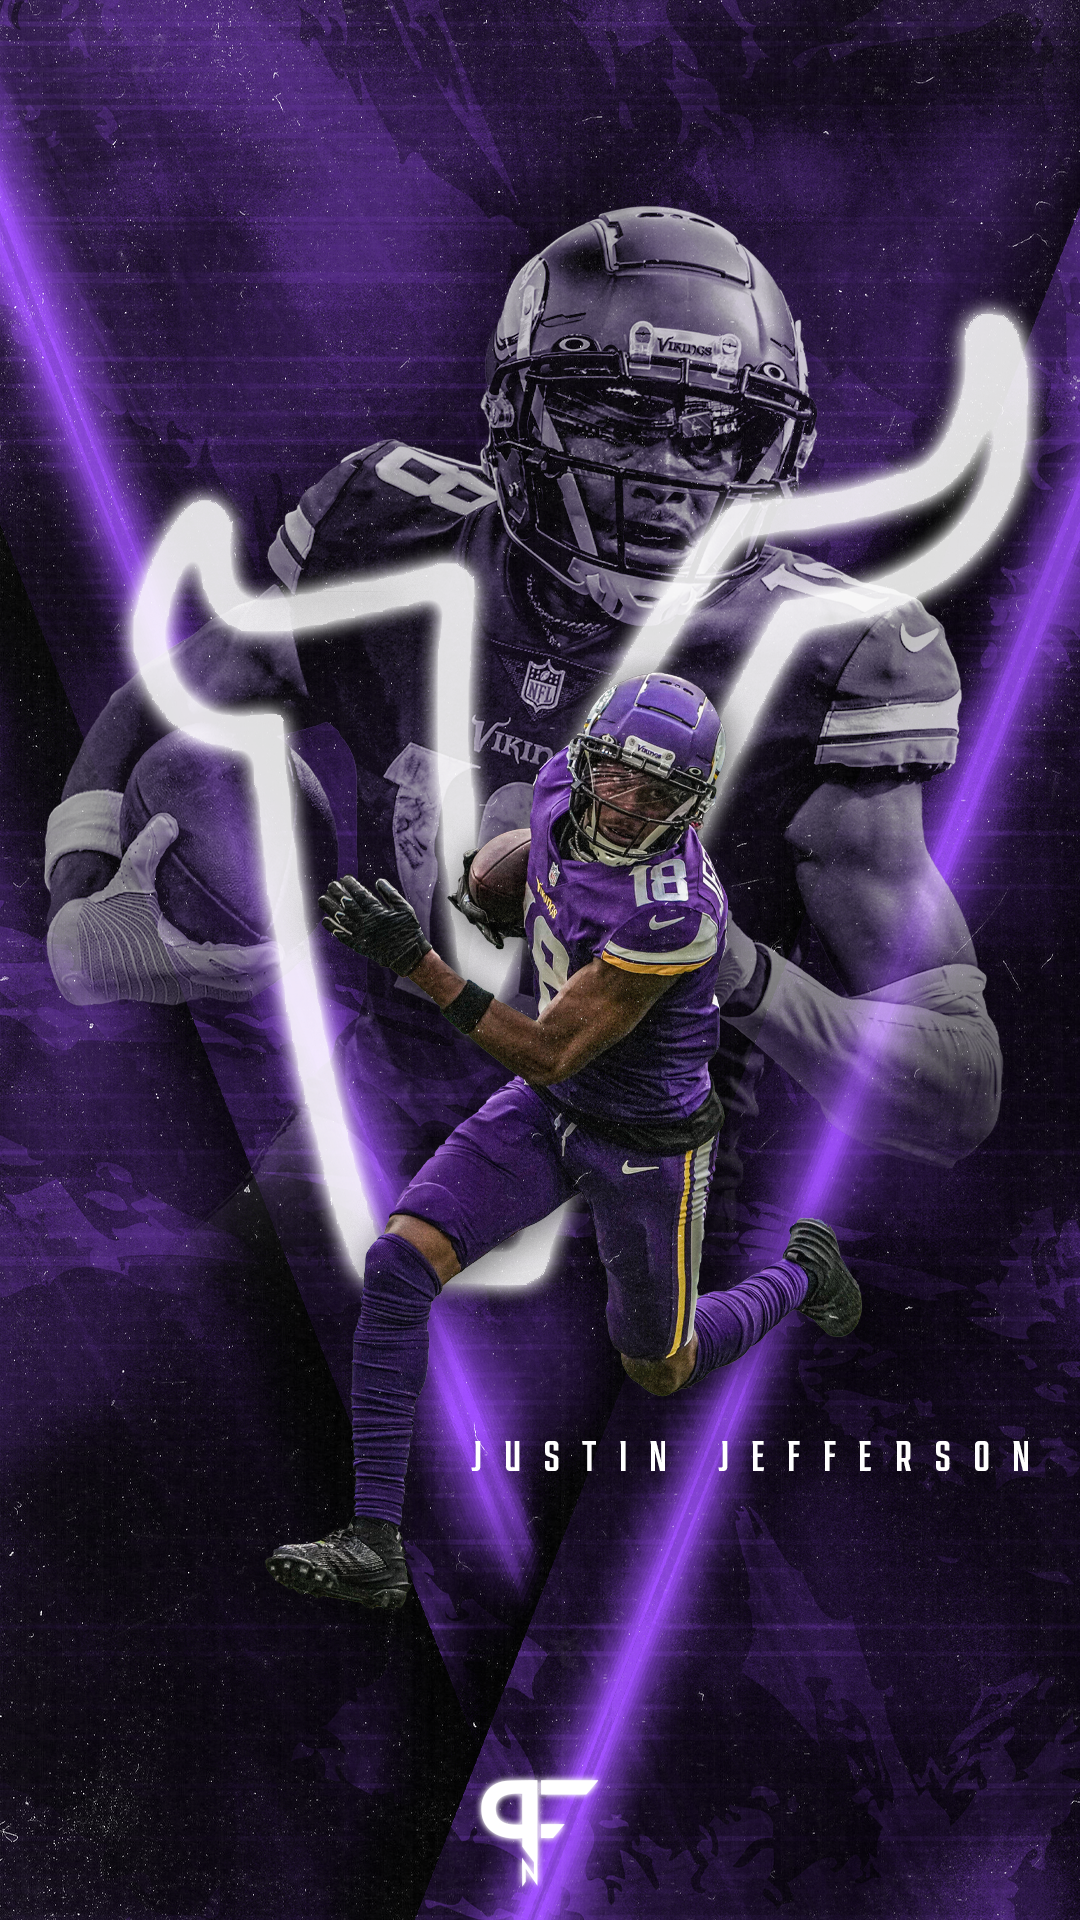 Justin Jefferson 2023 Wallpapers  Wallpaper Cave